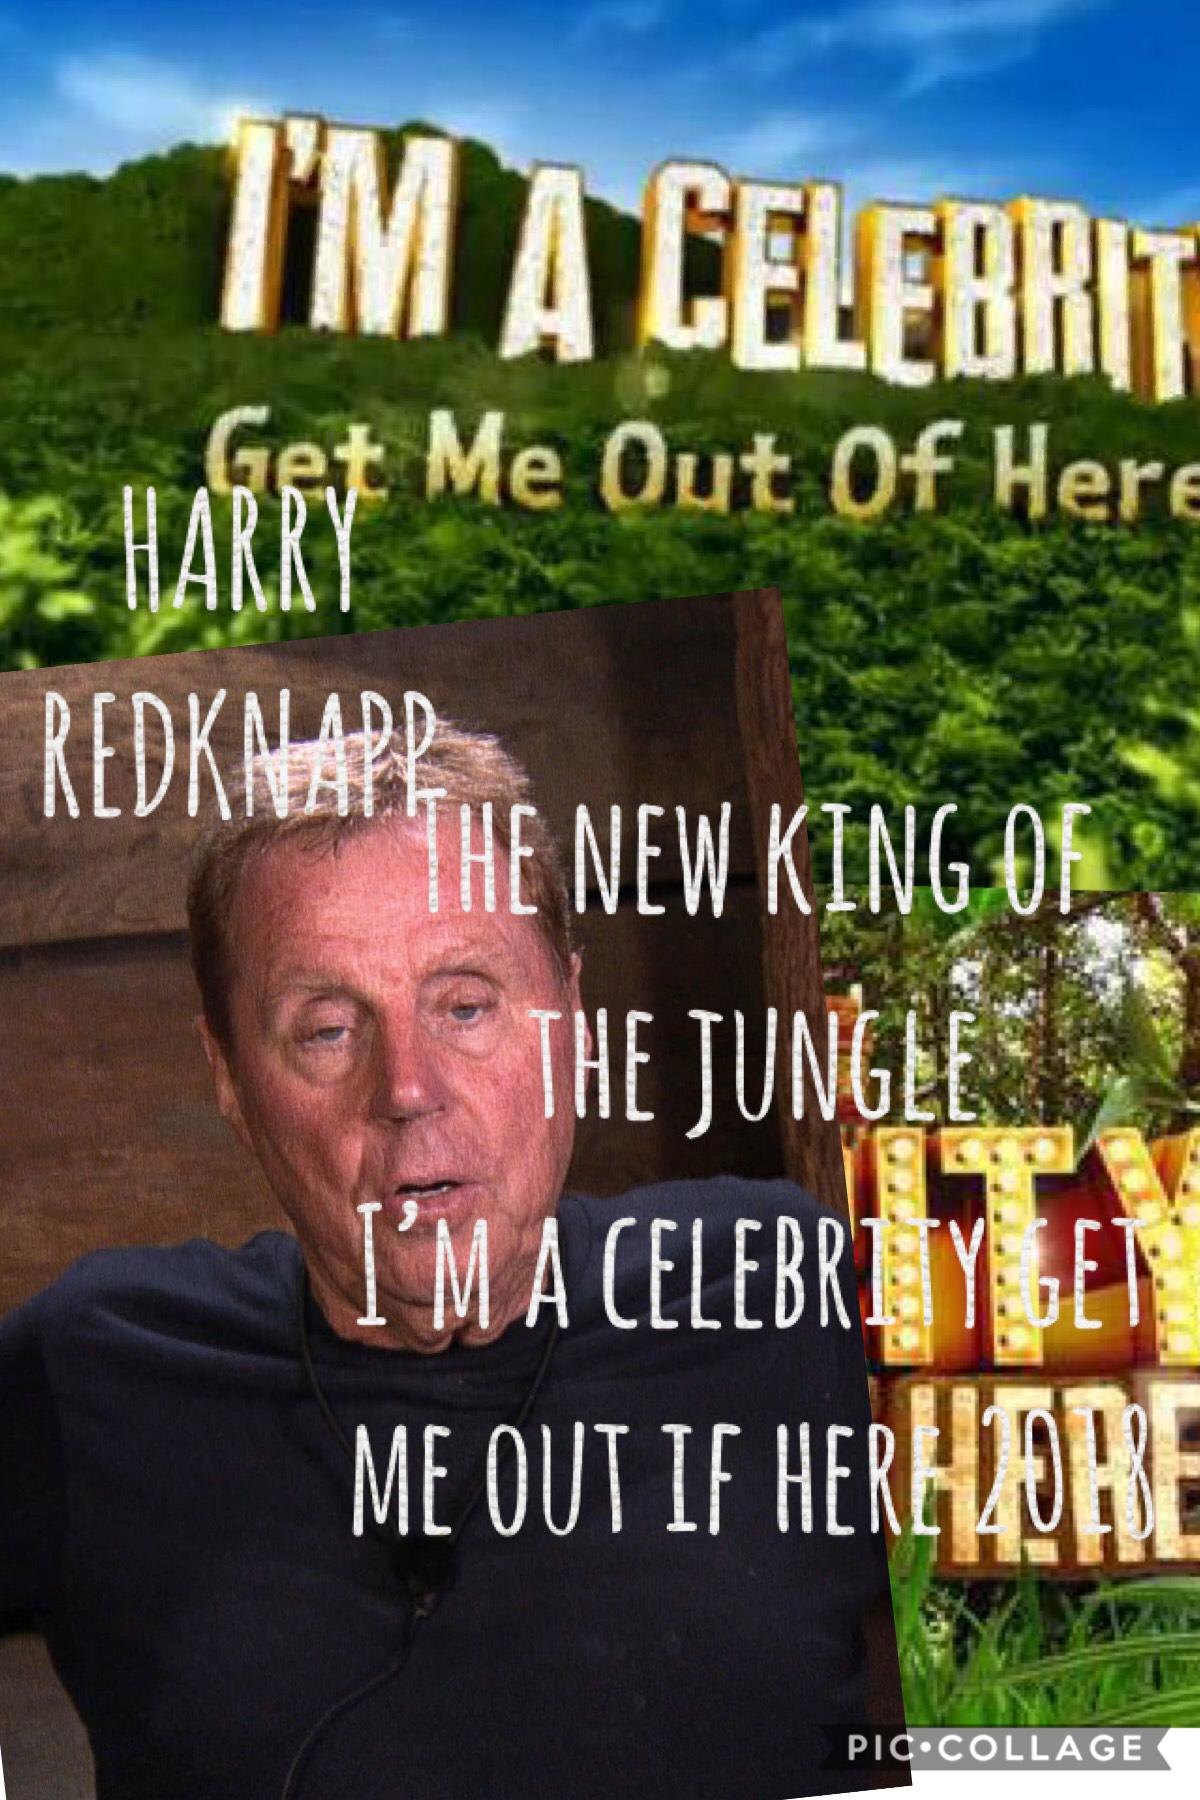 Harry Redknapp is the winner of this years “I’m a celebrity get me out of here” 2018